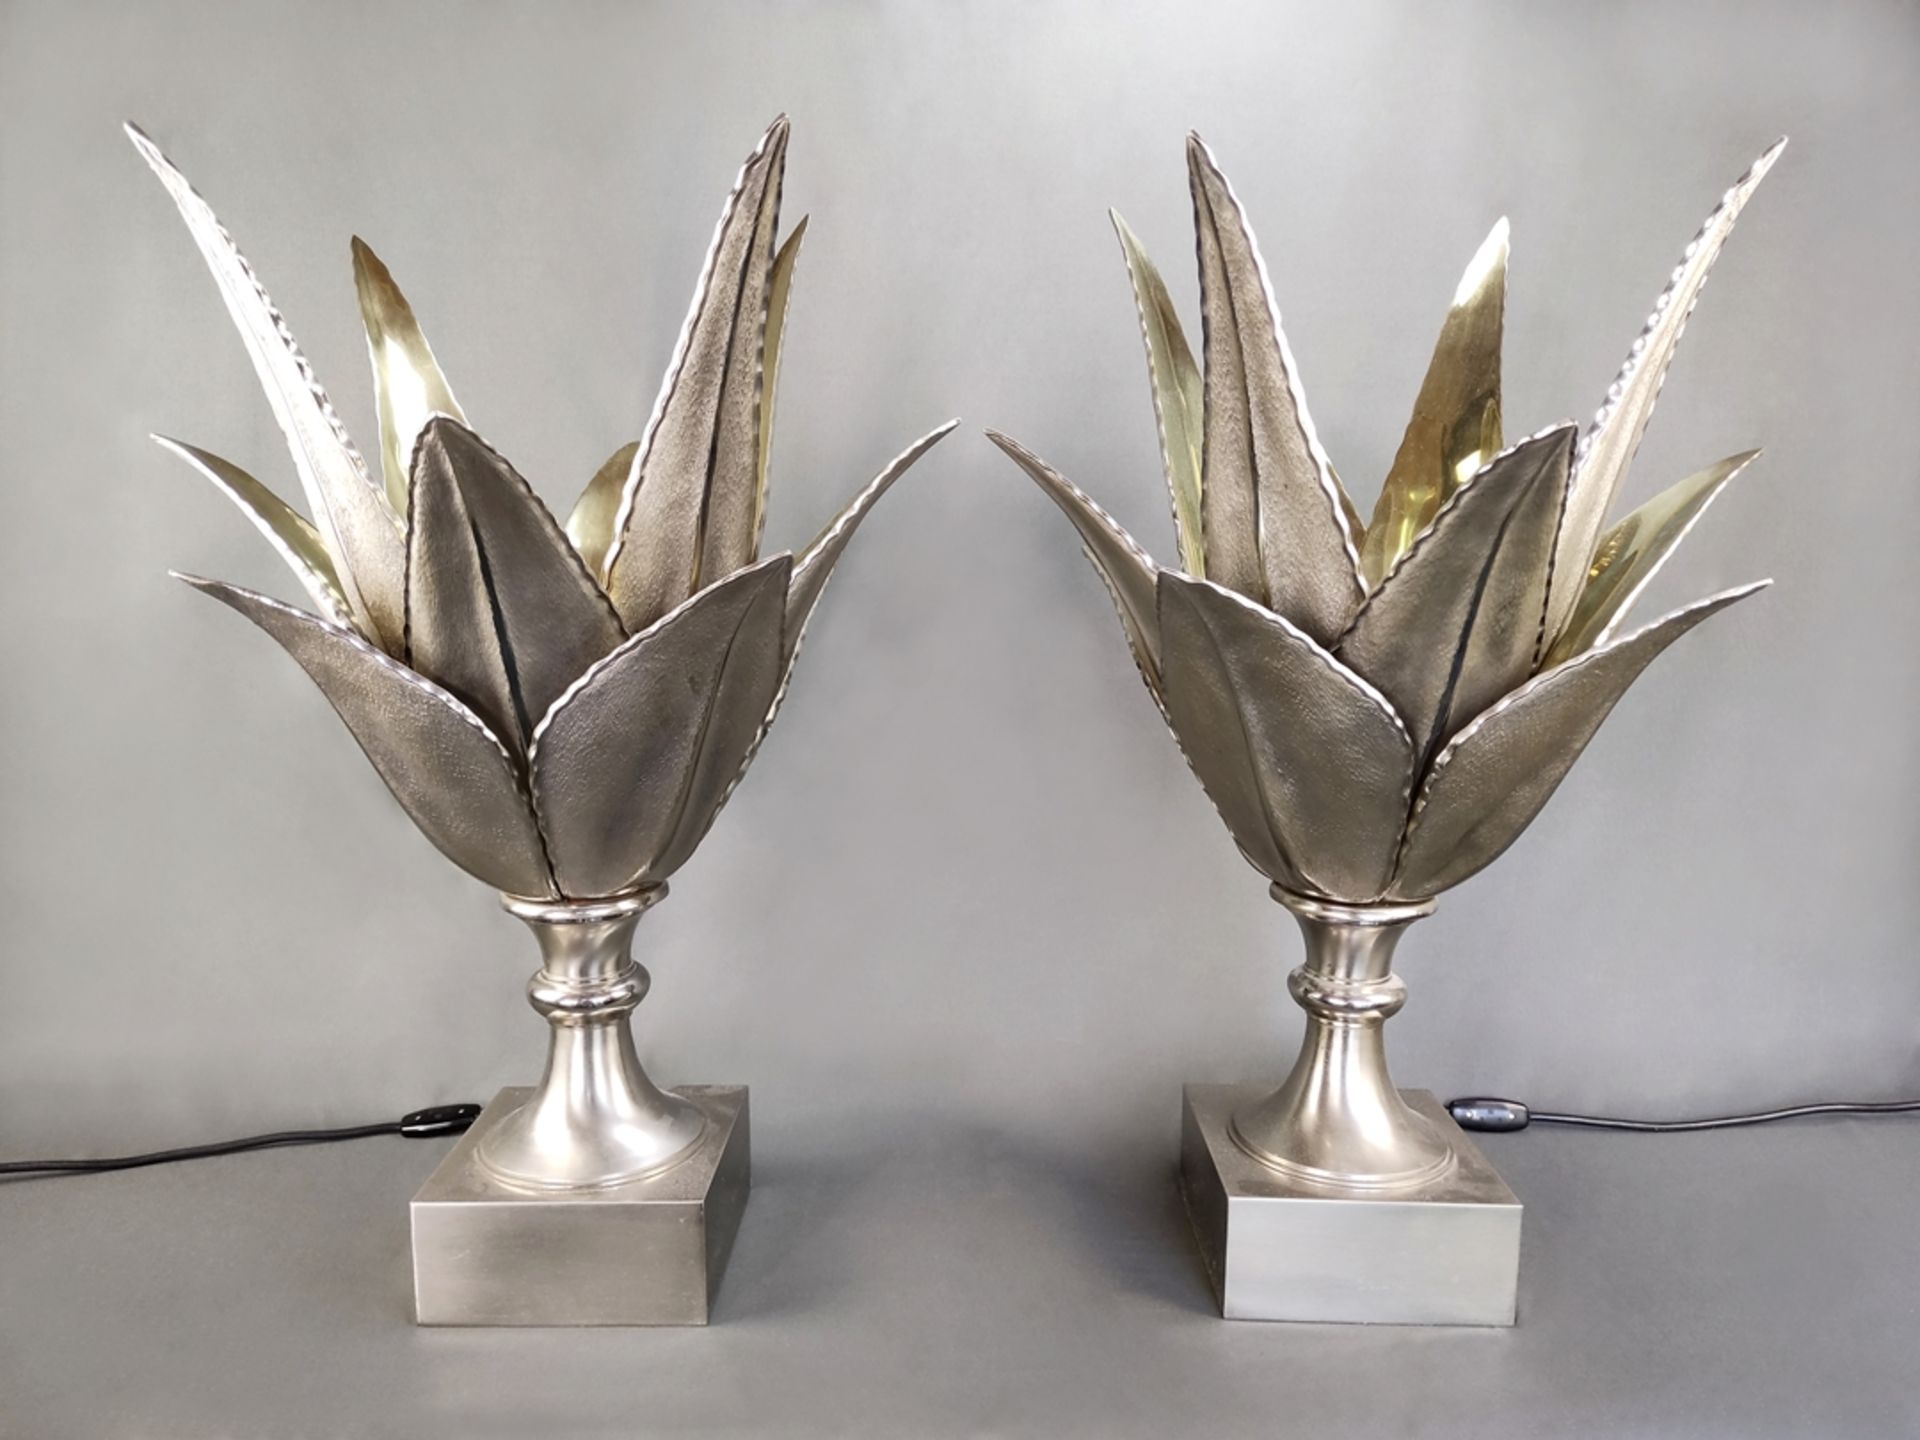 Pair of table lamps, Maison Charles, France, c. 1970, "Aloes", in the shape of aloe vera plants, si